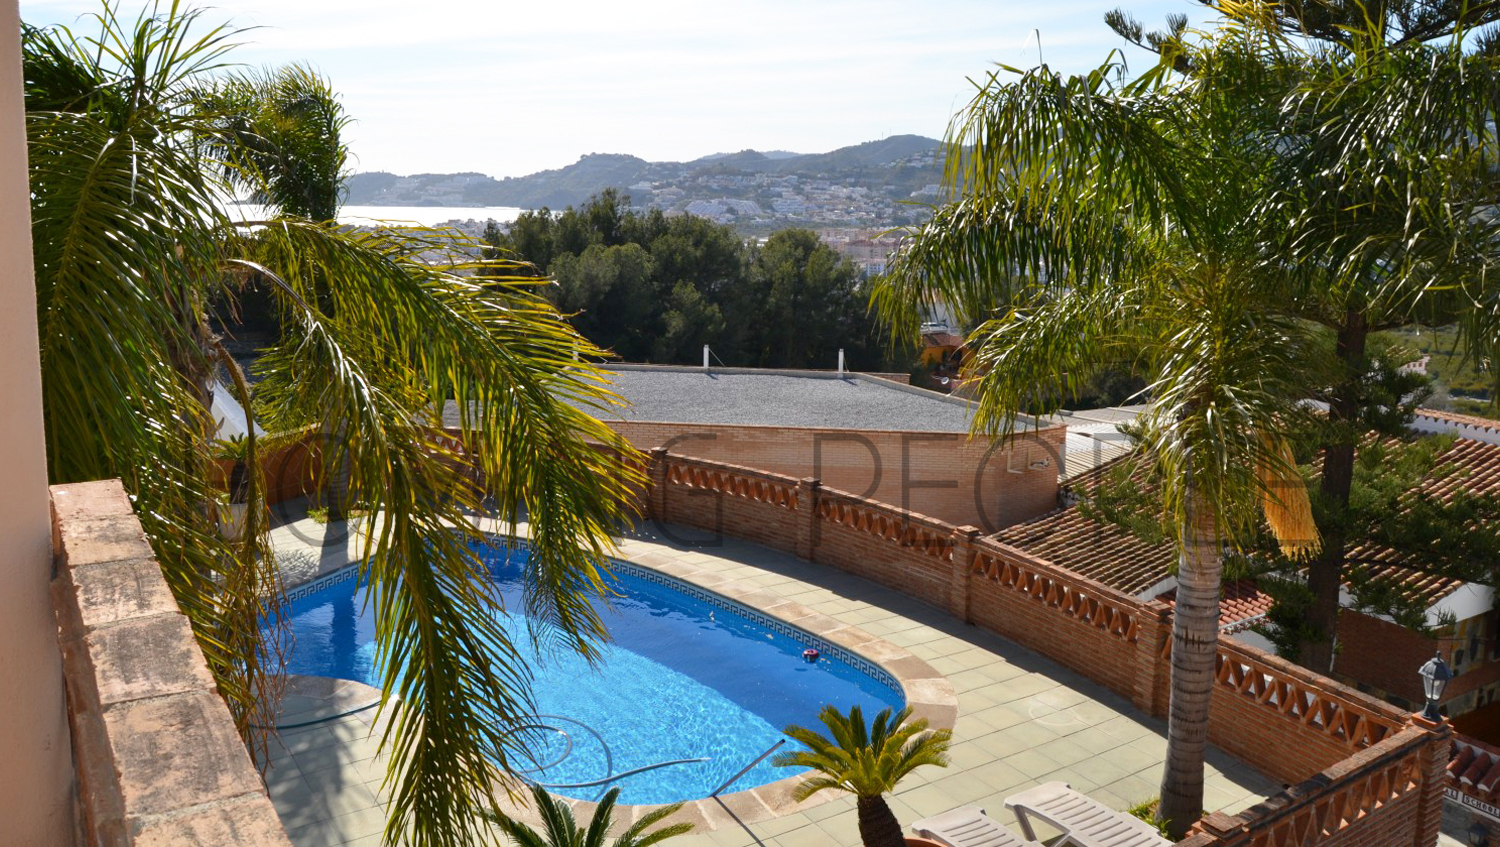 [SOLD]: Fantastic villa with views of the valley, the sea and the city